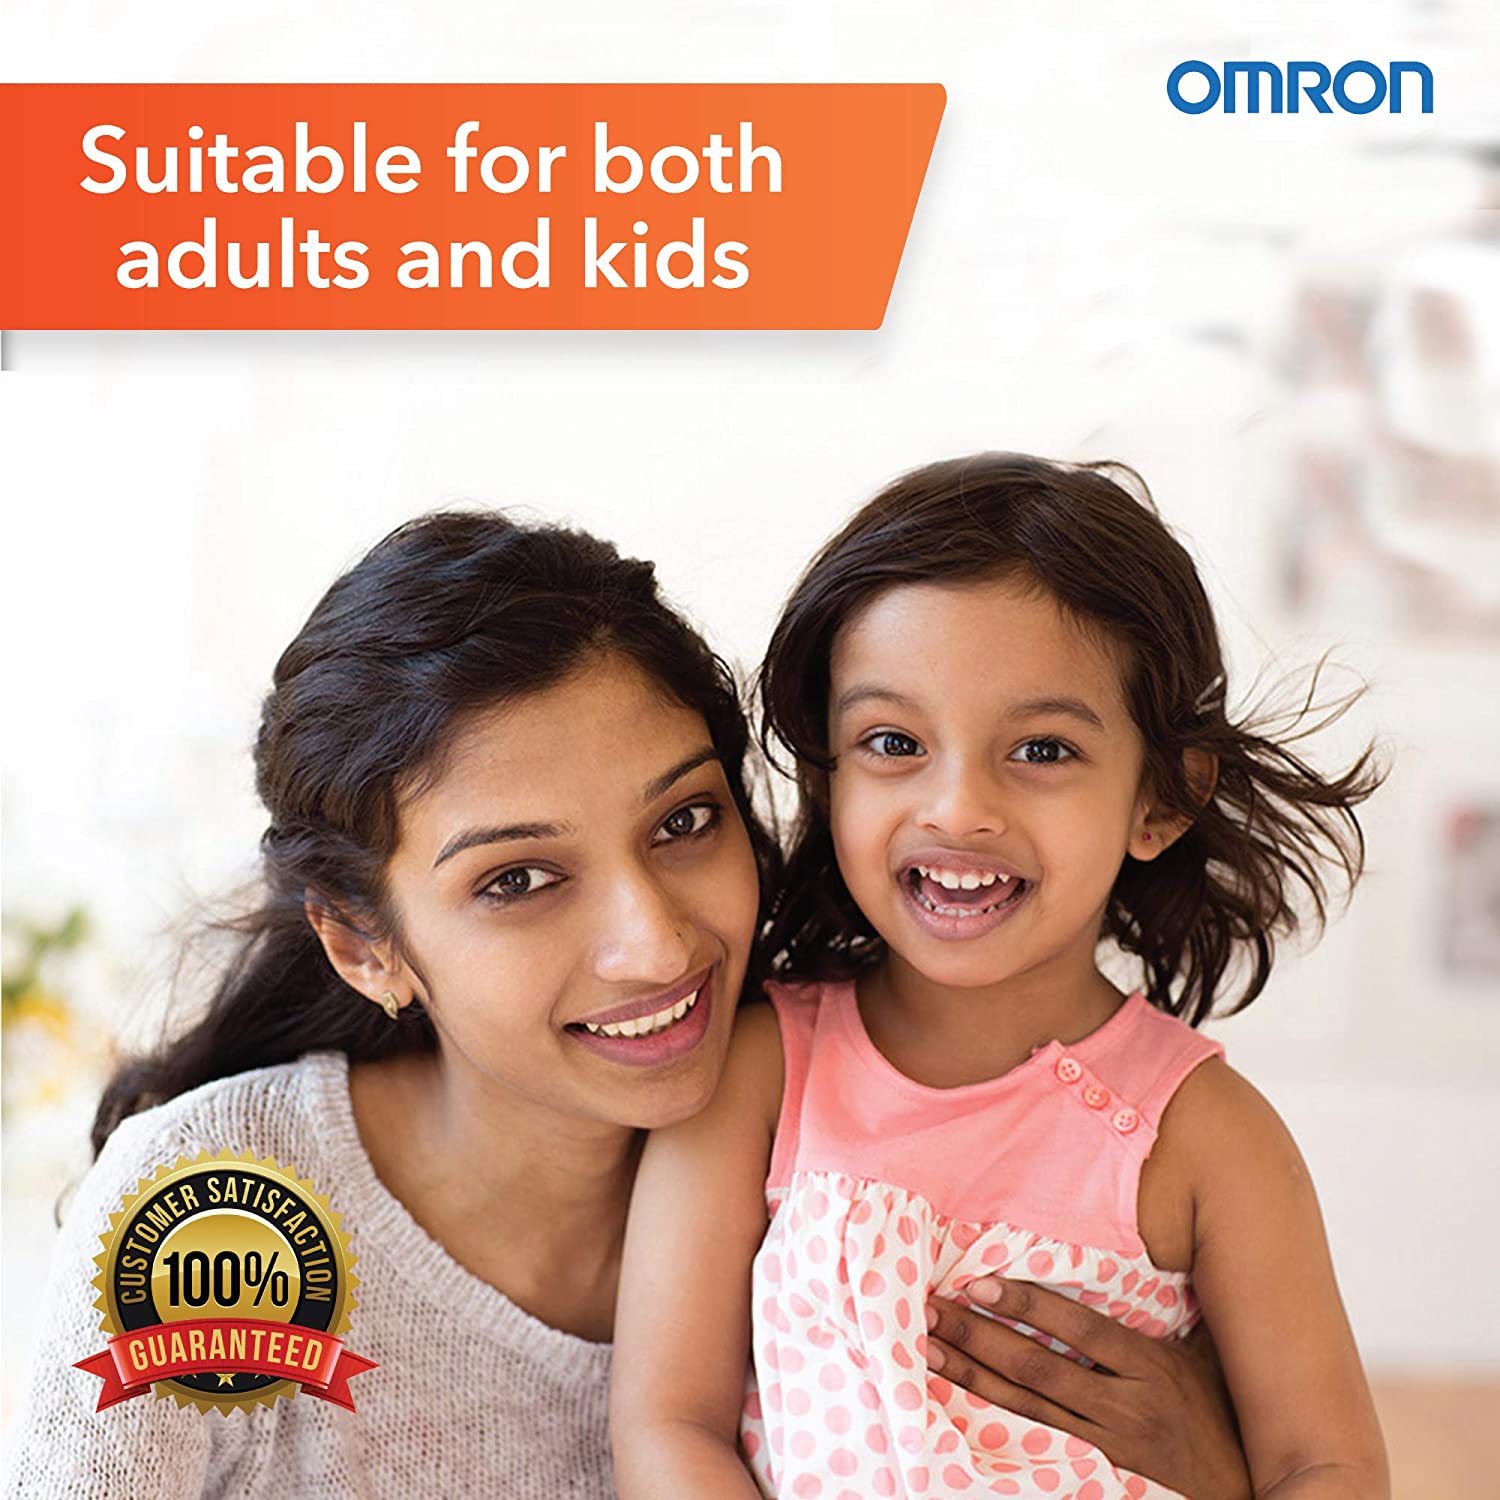 Omron NE C28 Compressor Nebulizer For Child and Adult With Virtual Valve Technology Ensuring Optimum Medicine Delivery to the Raspiratory System